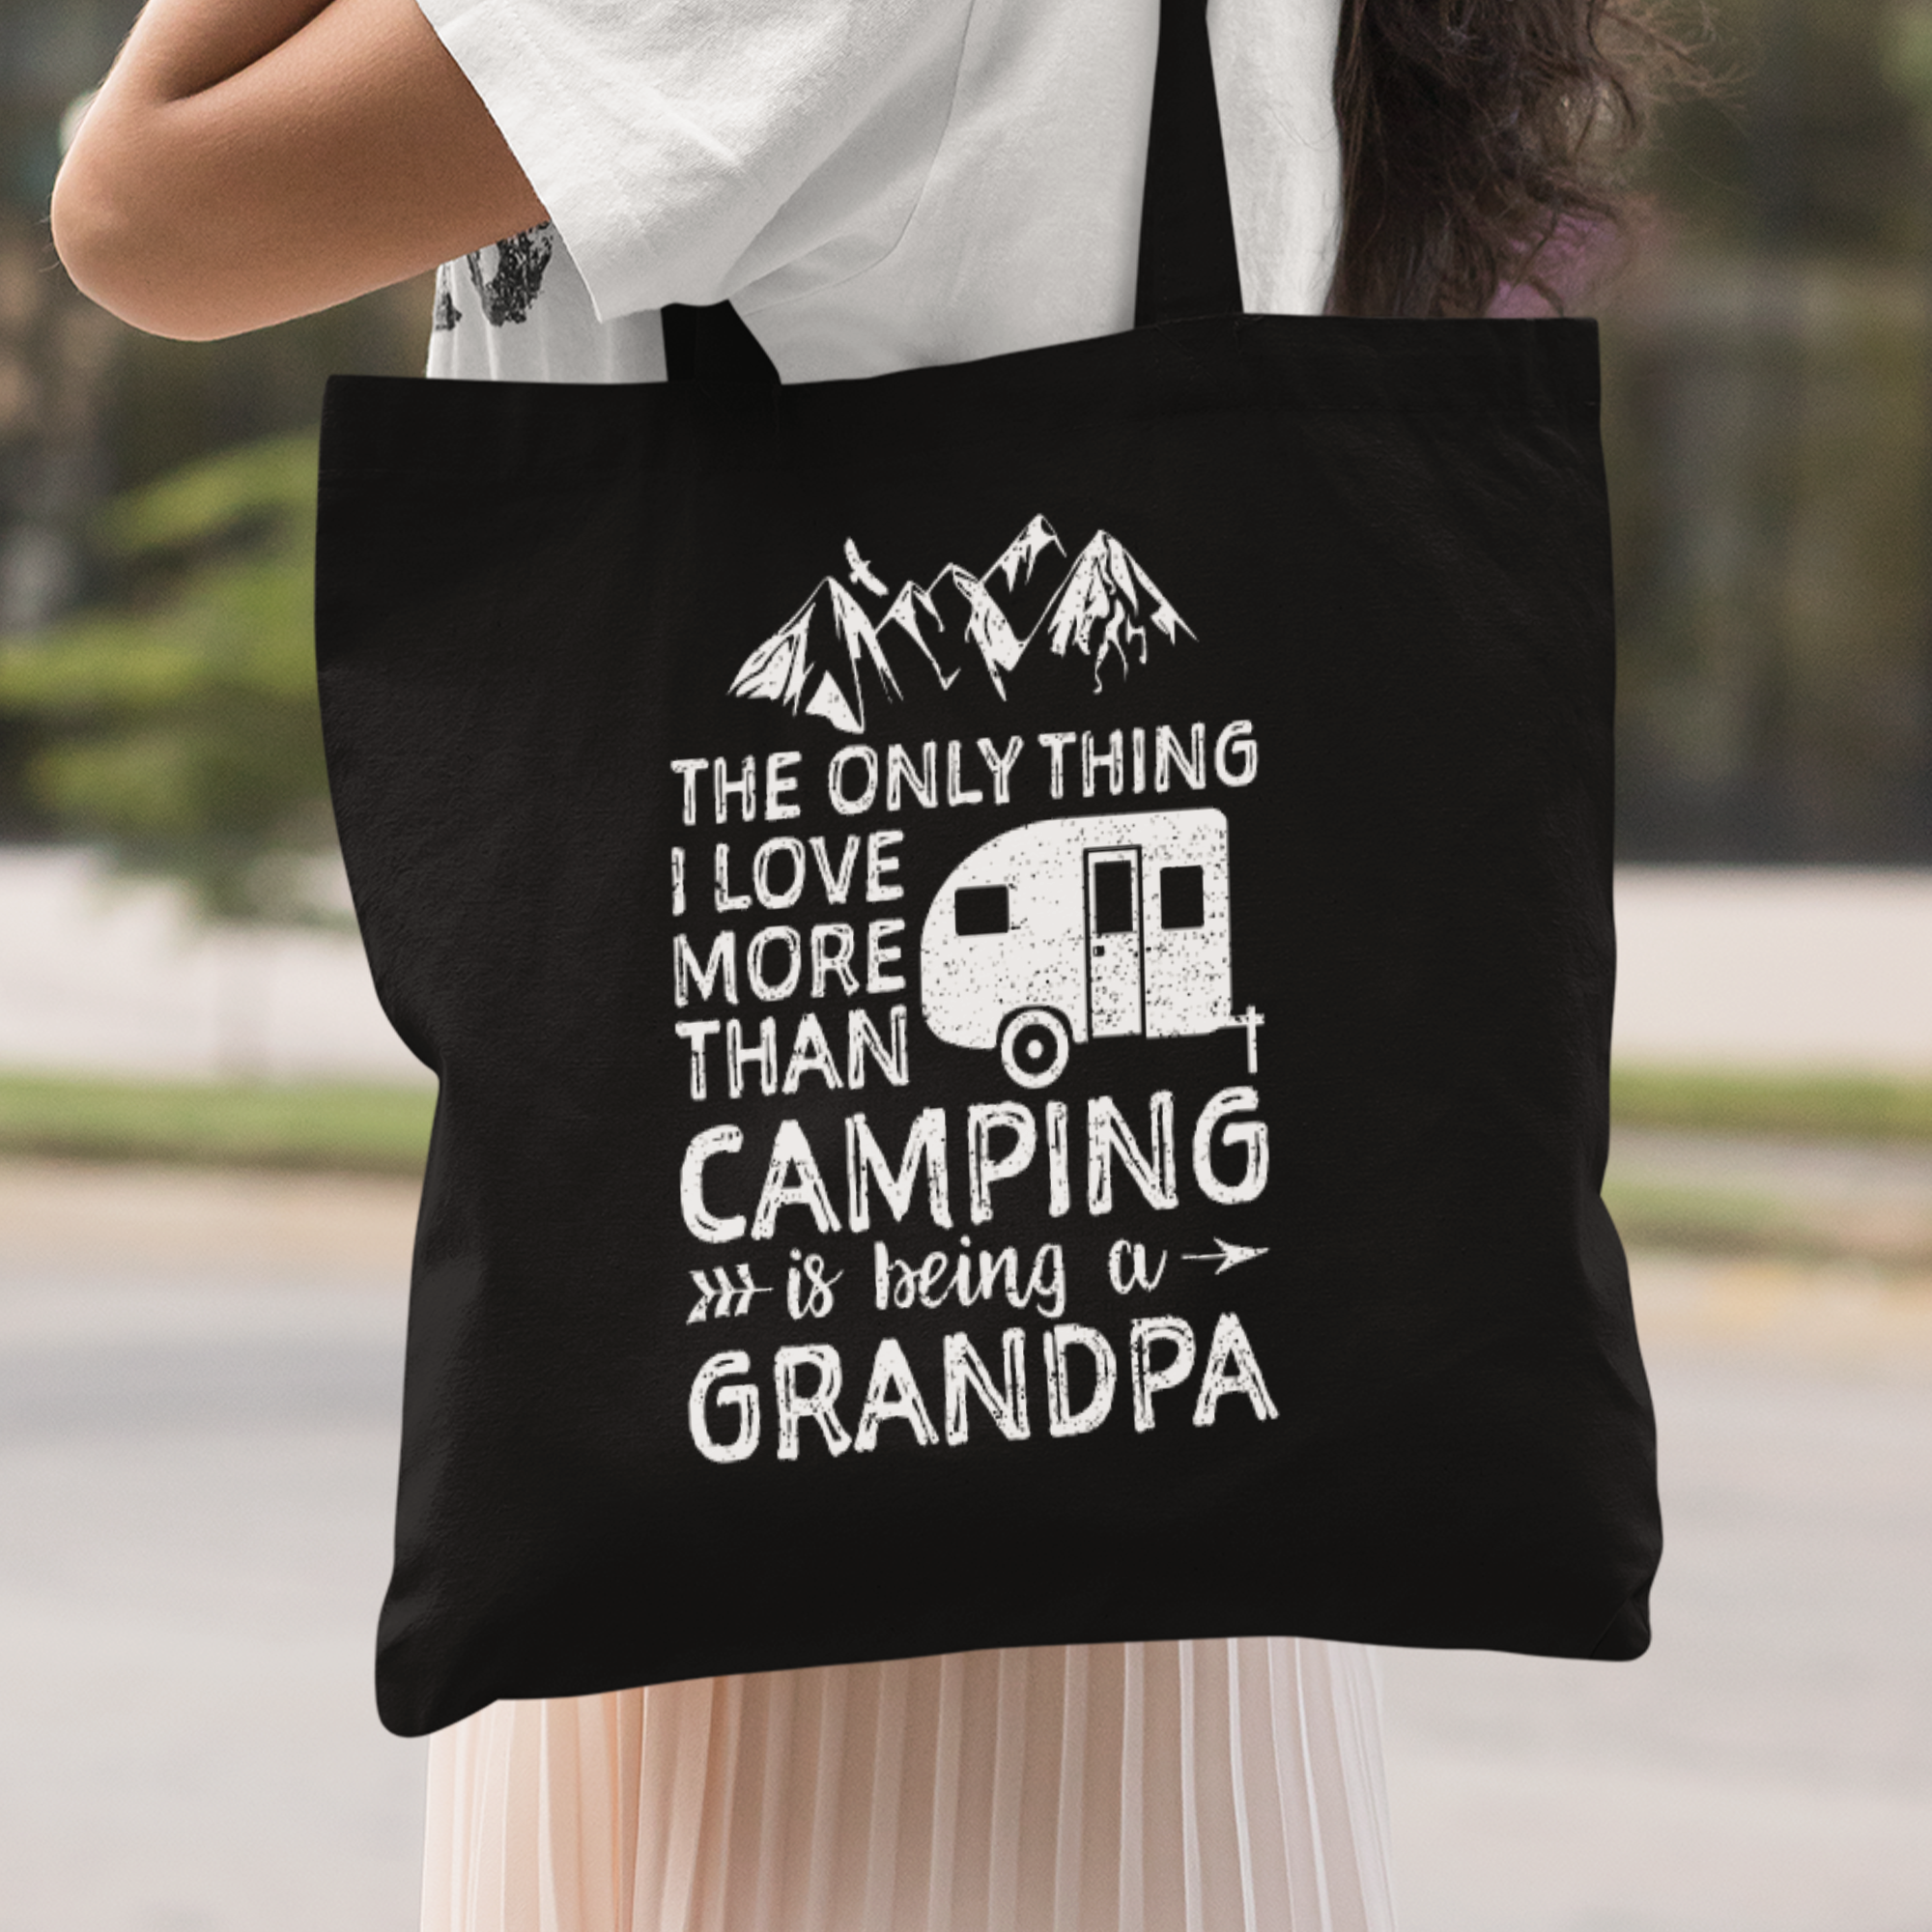 The Only Thing I Love More Than Camping Is Being A Grandpa Stoffbeutel - DESIGNSBYJNK5.COM